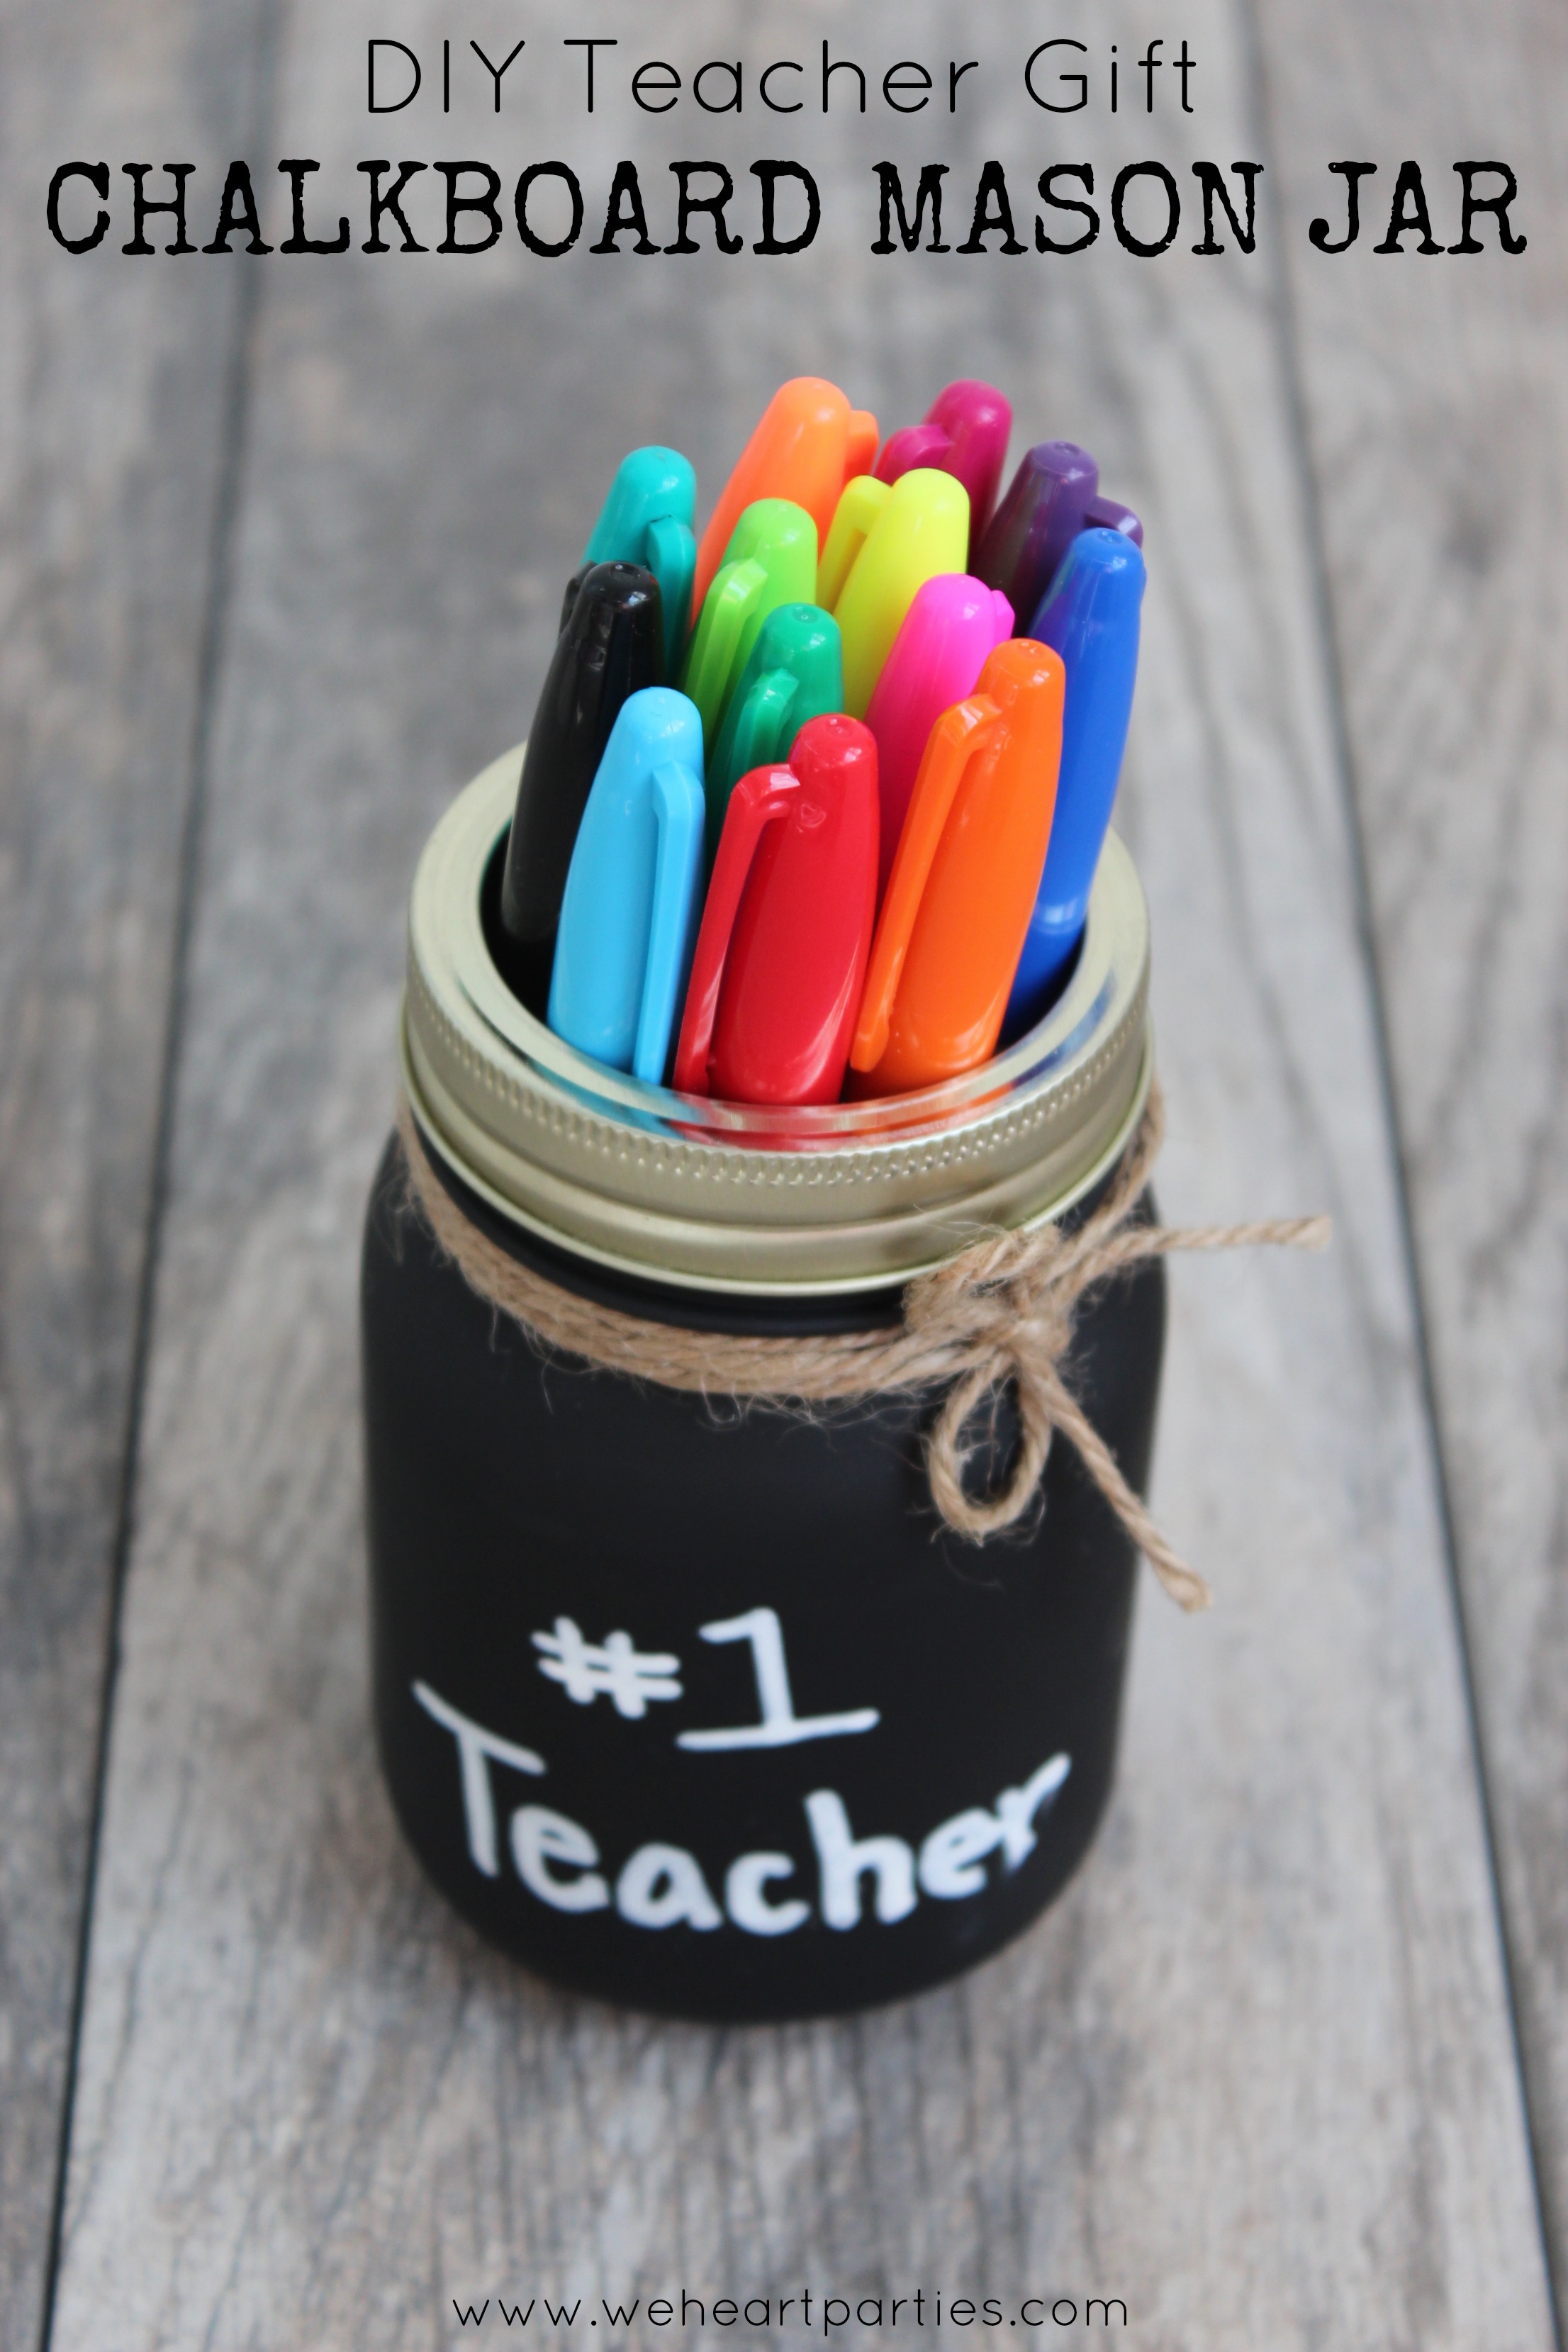 Gift Idea: Chalkboard Jar with a Message